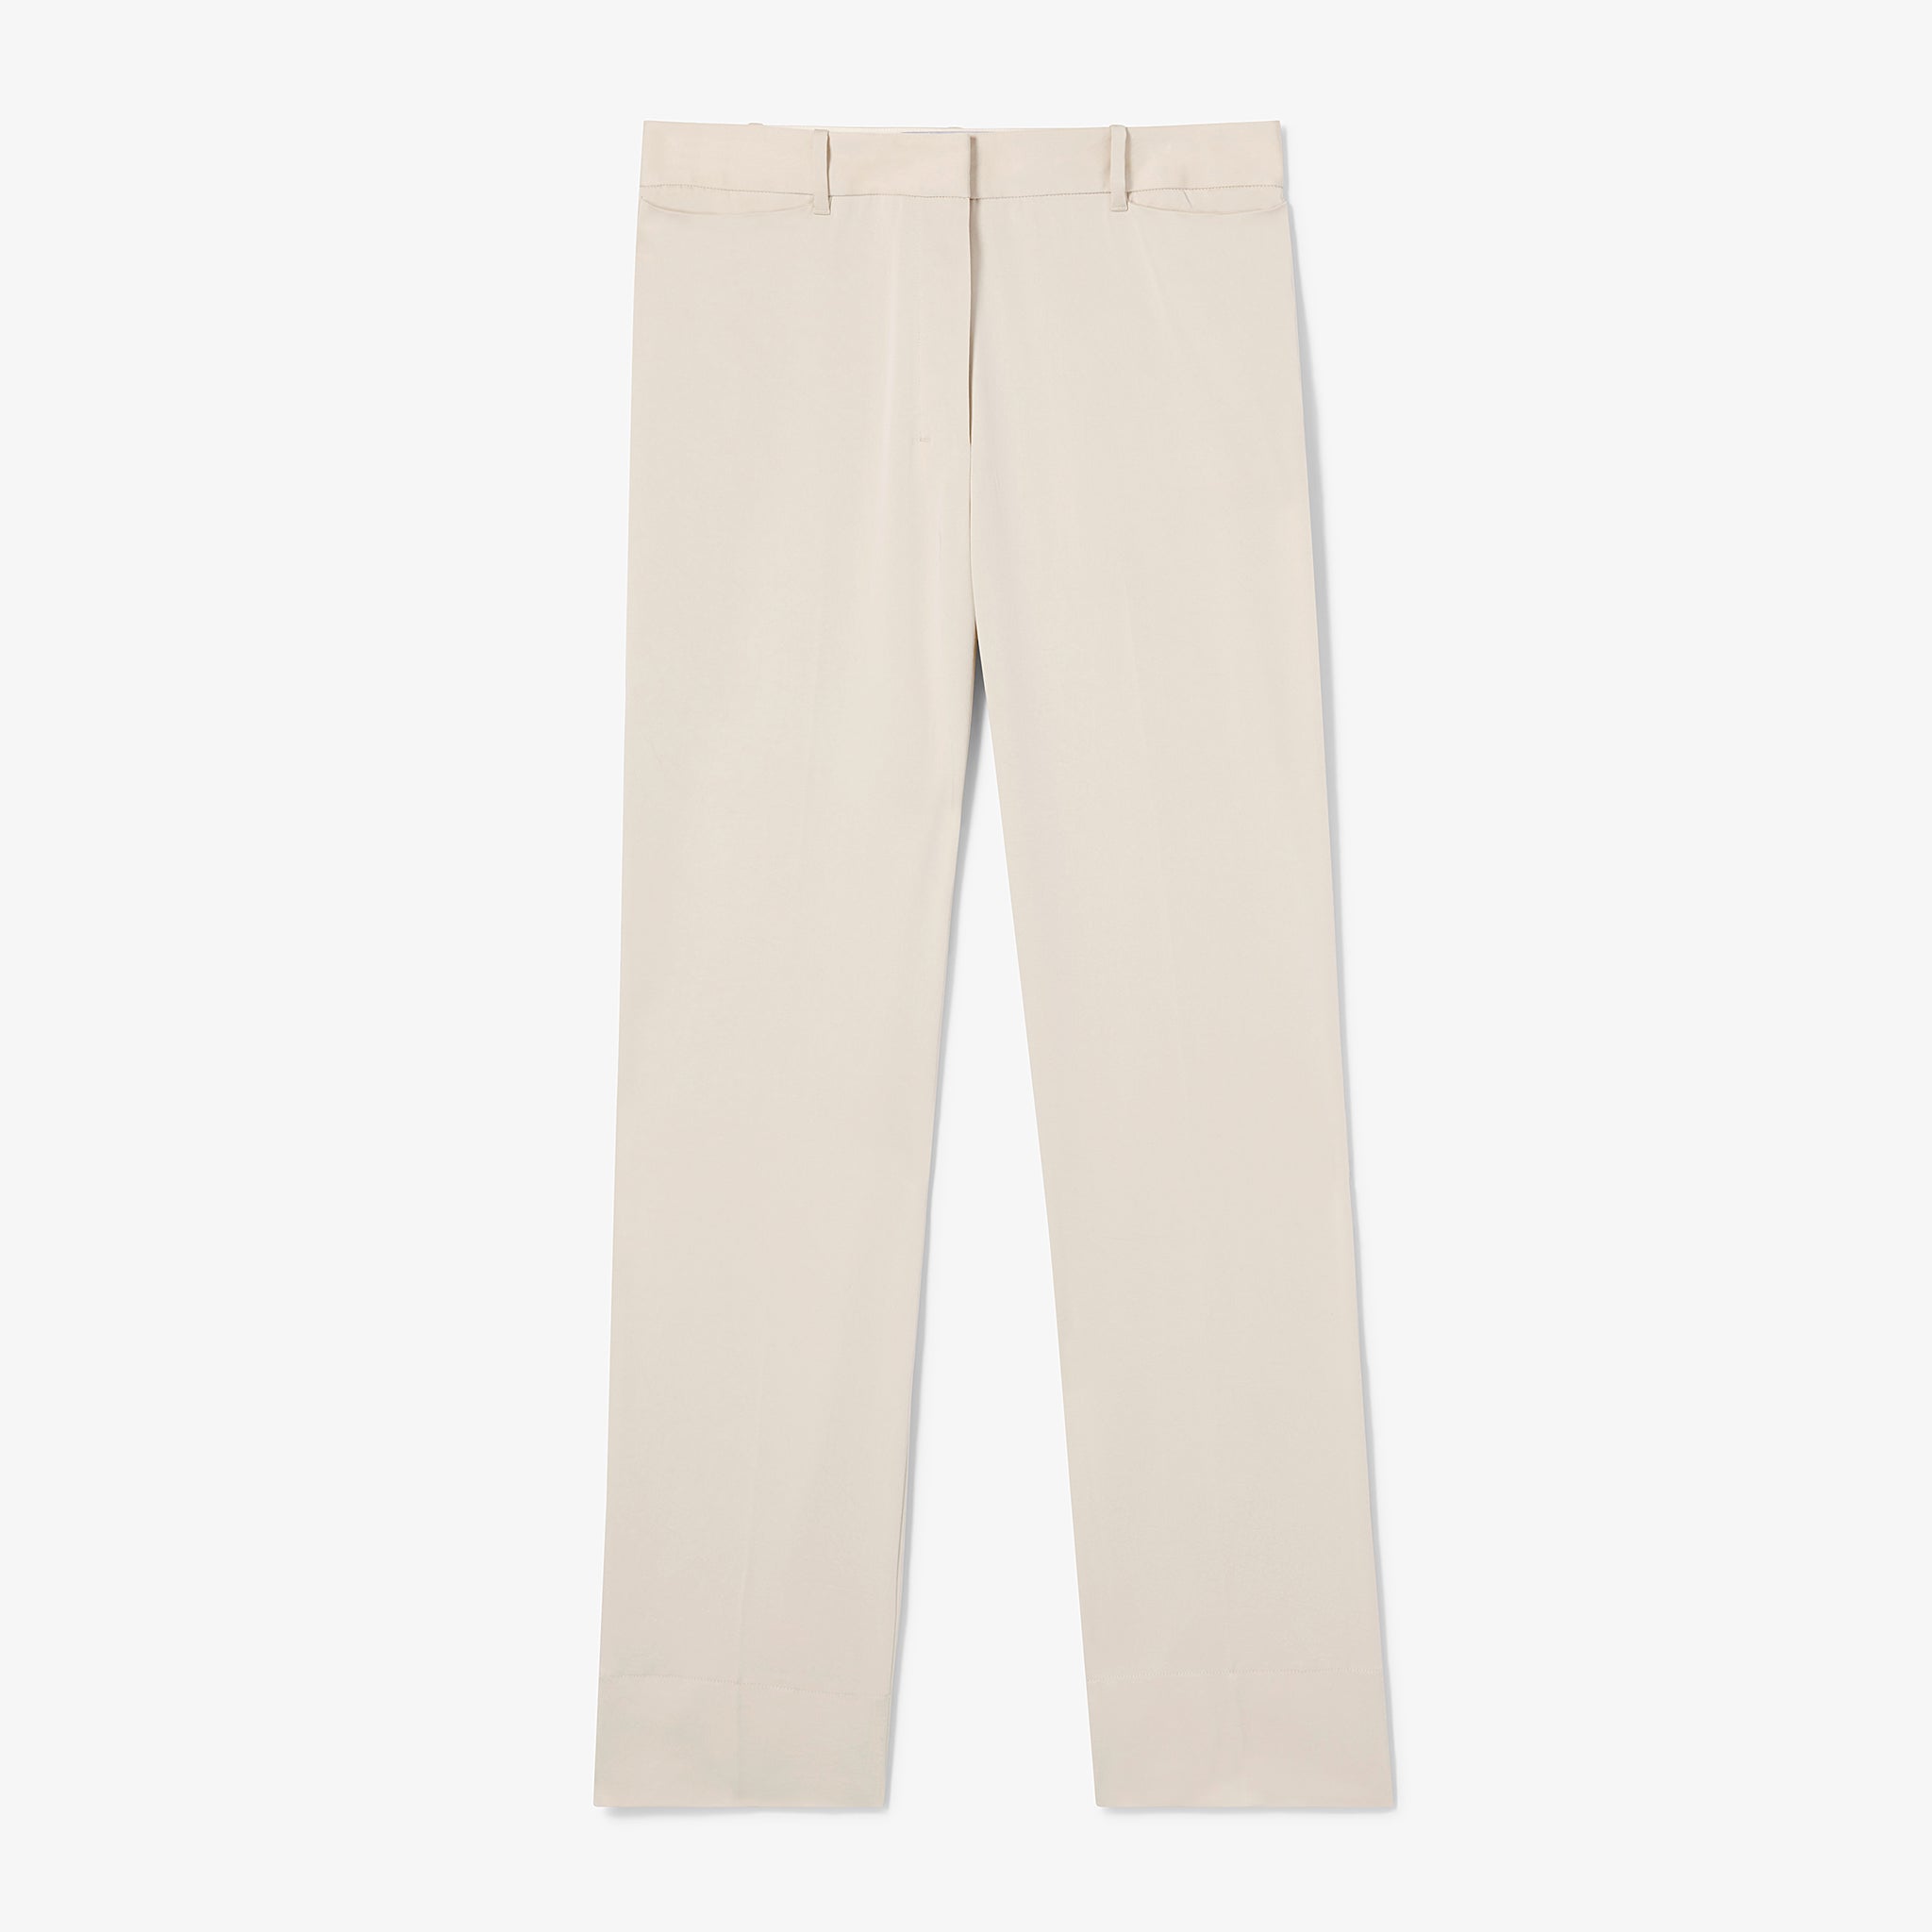 packshot image of the smith pant in champagne